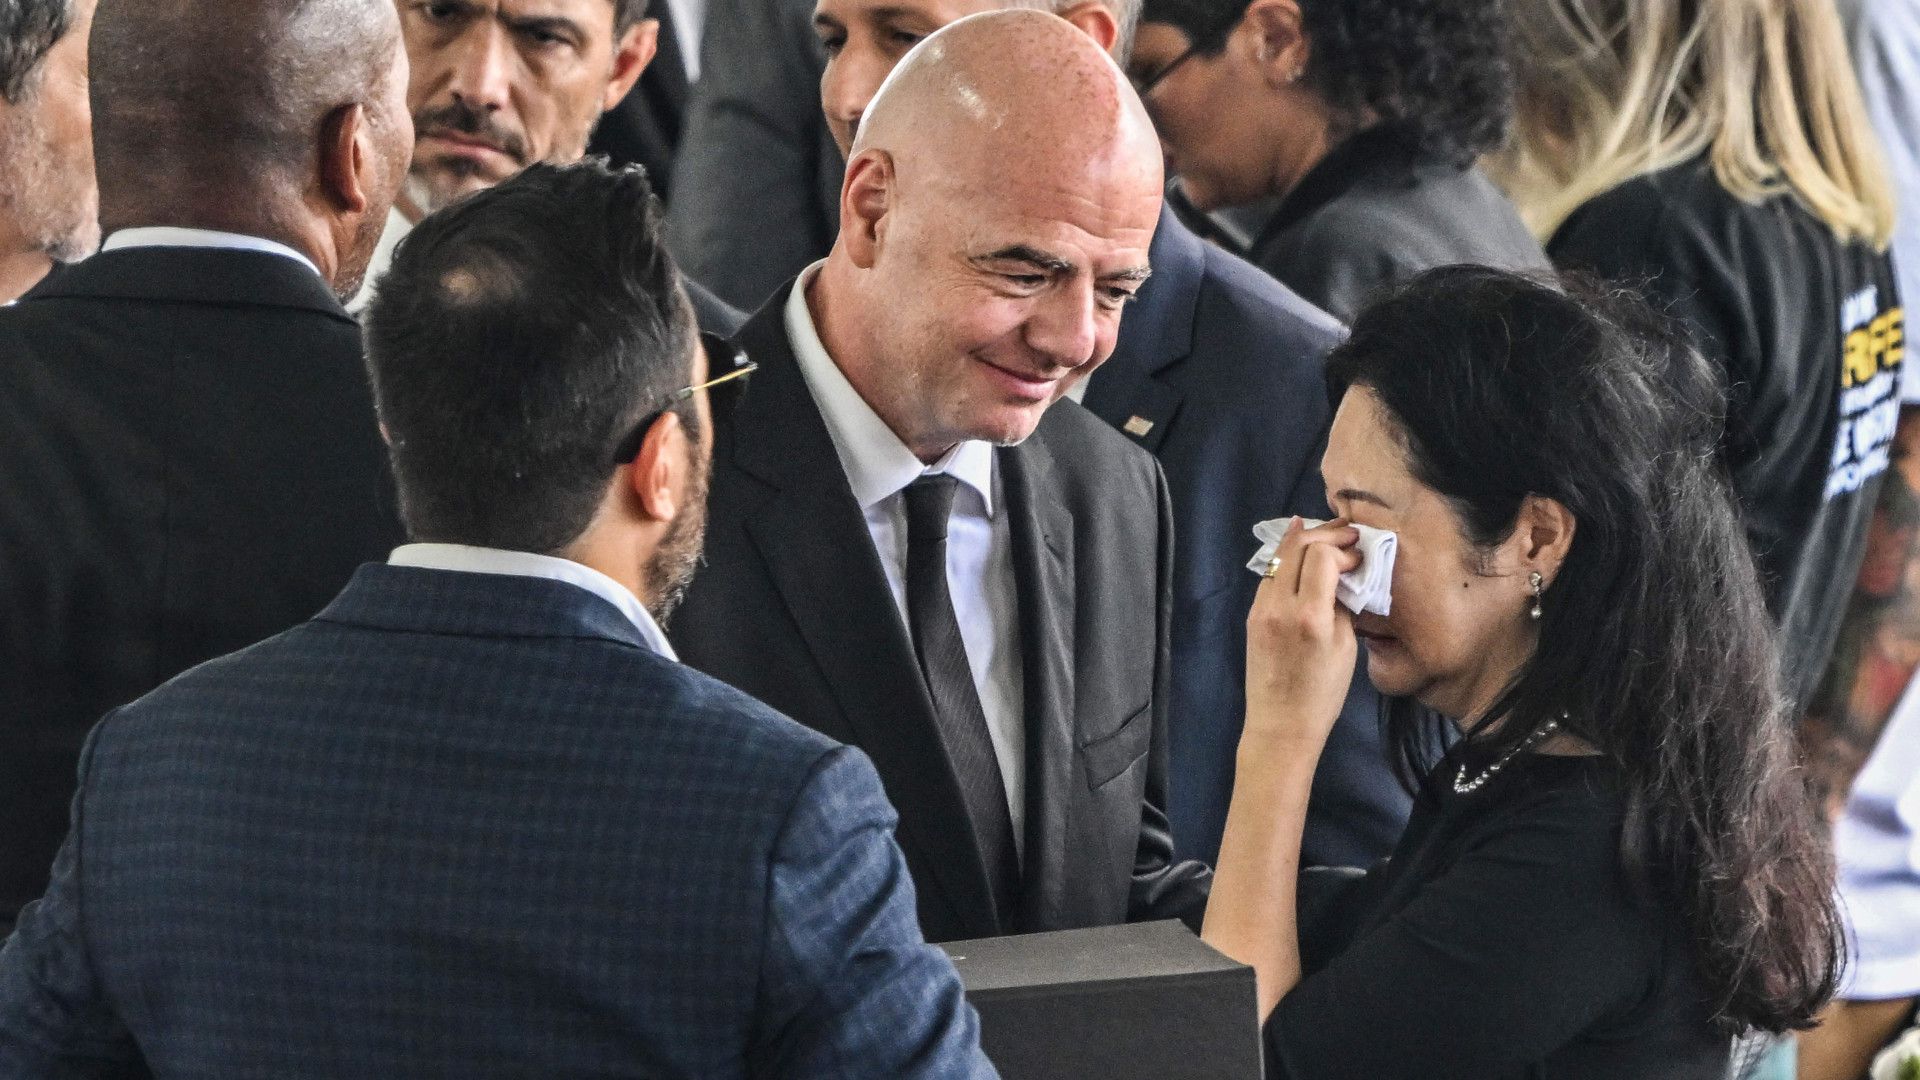 FIFA President Gianni Infantino at the funeral of Brazilian legend Pele, in 2022